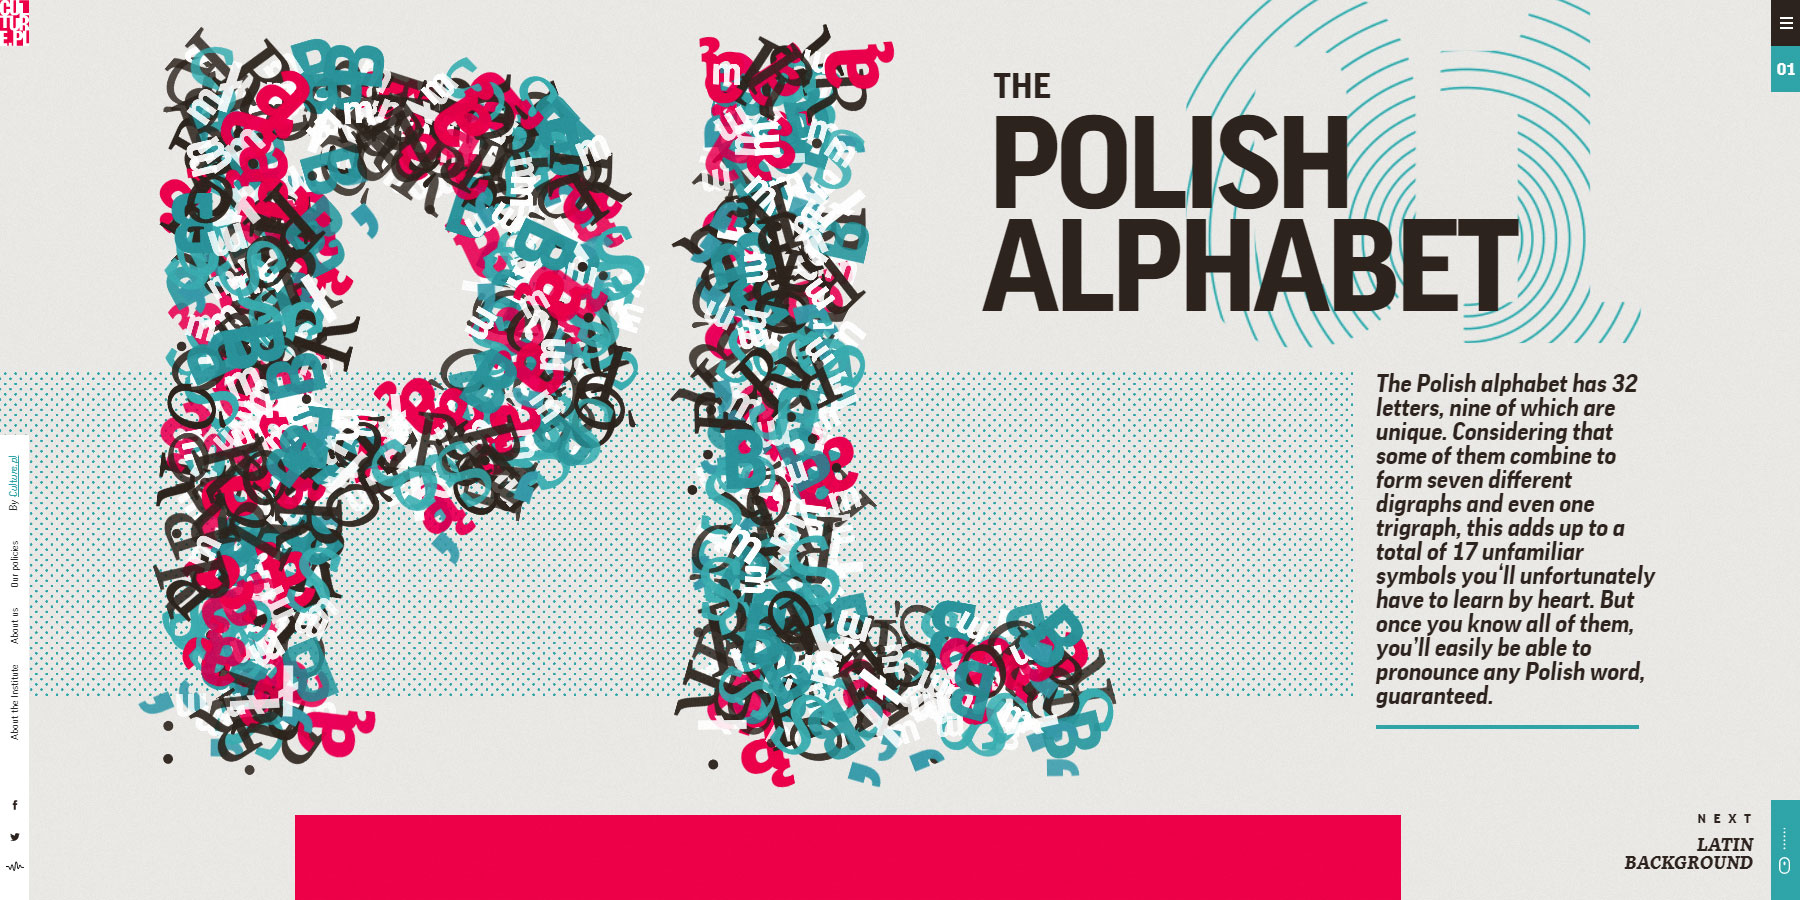 Guide to the Polish Alphabet - Website of the Day